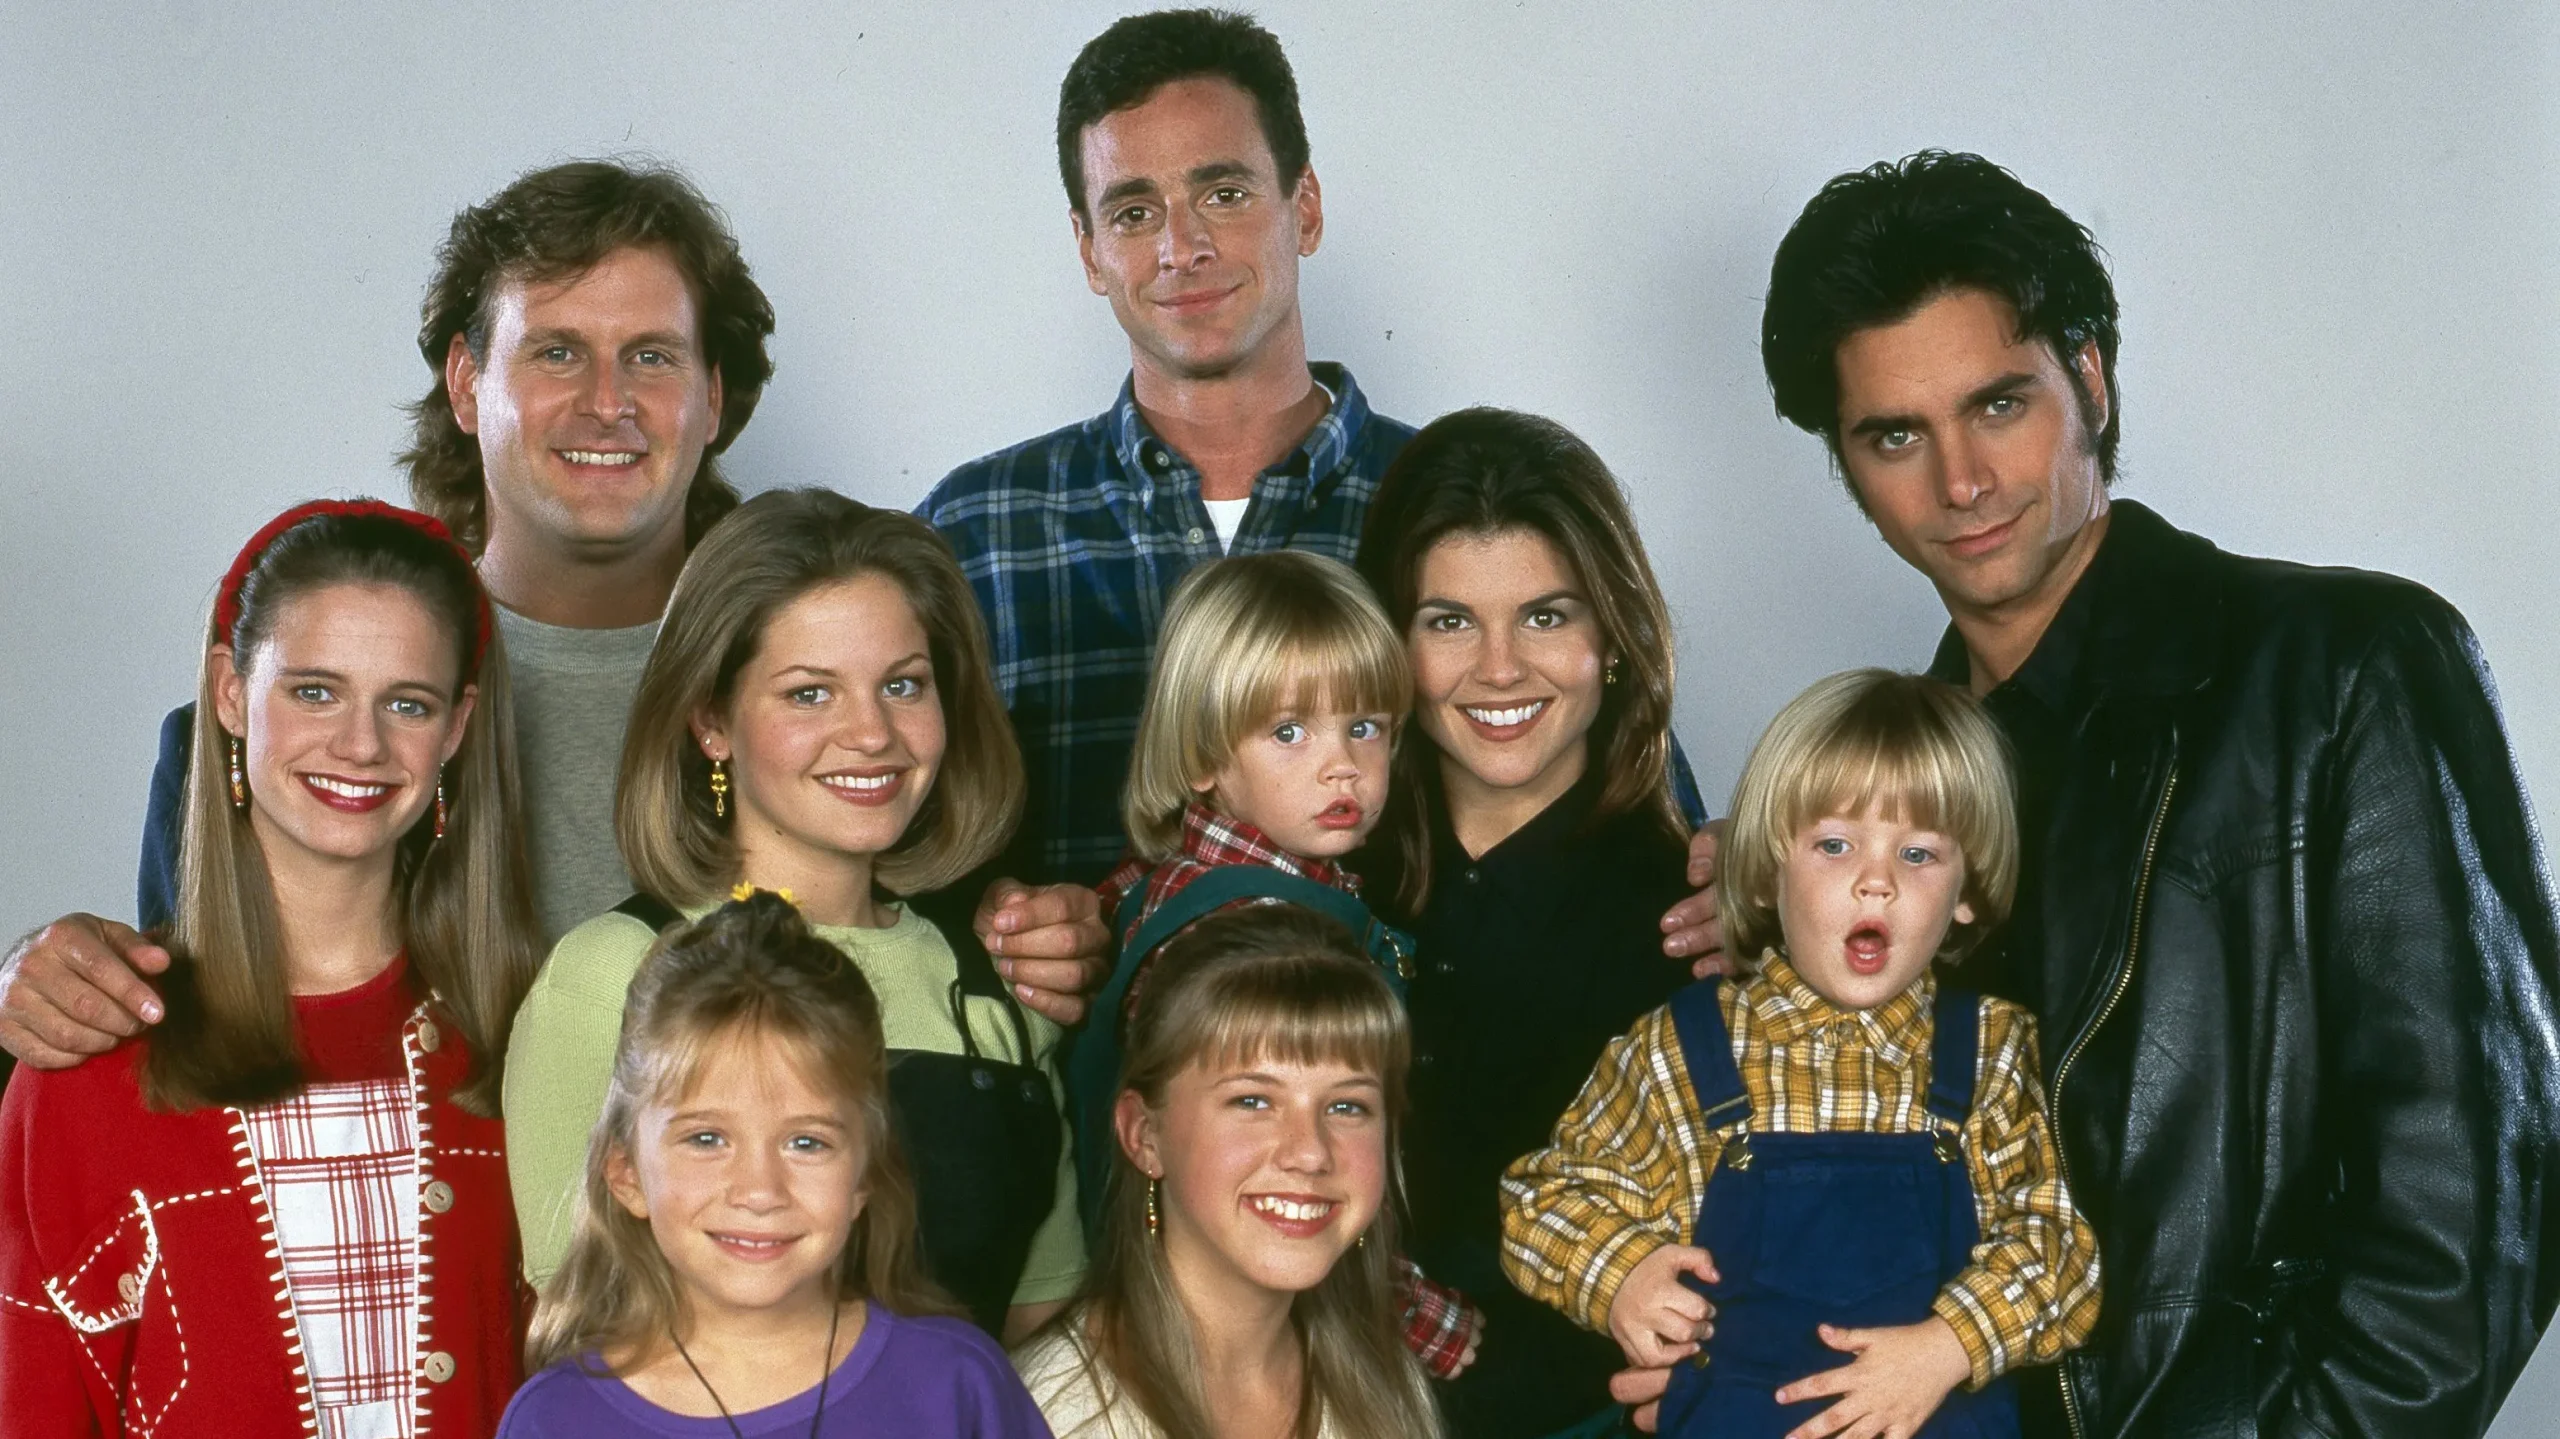 Who Are the Cast Members of Full House?